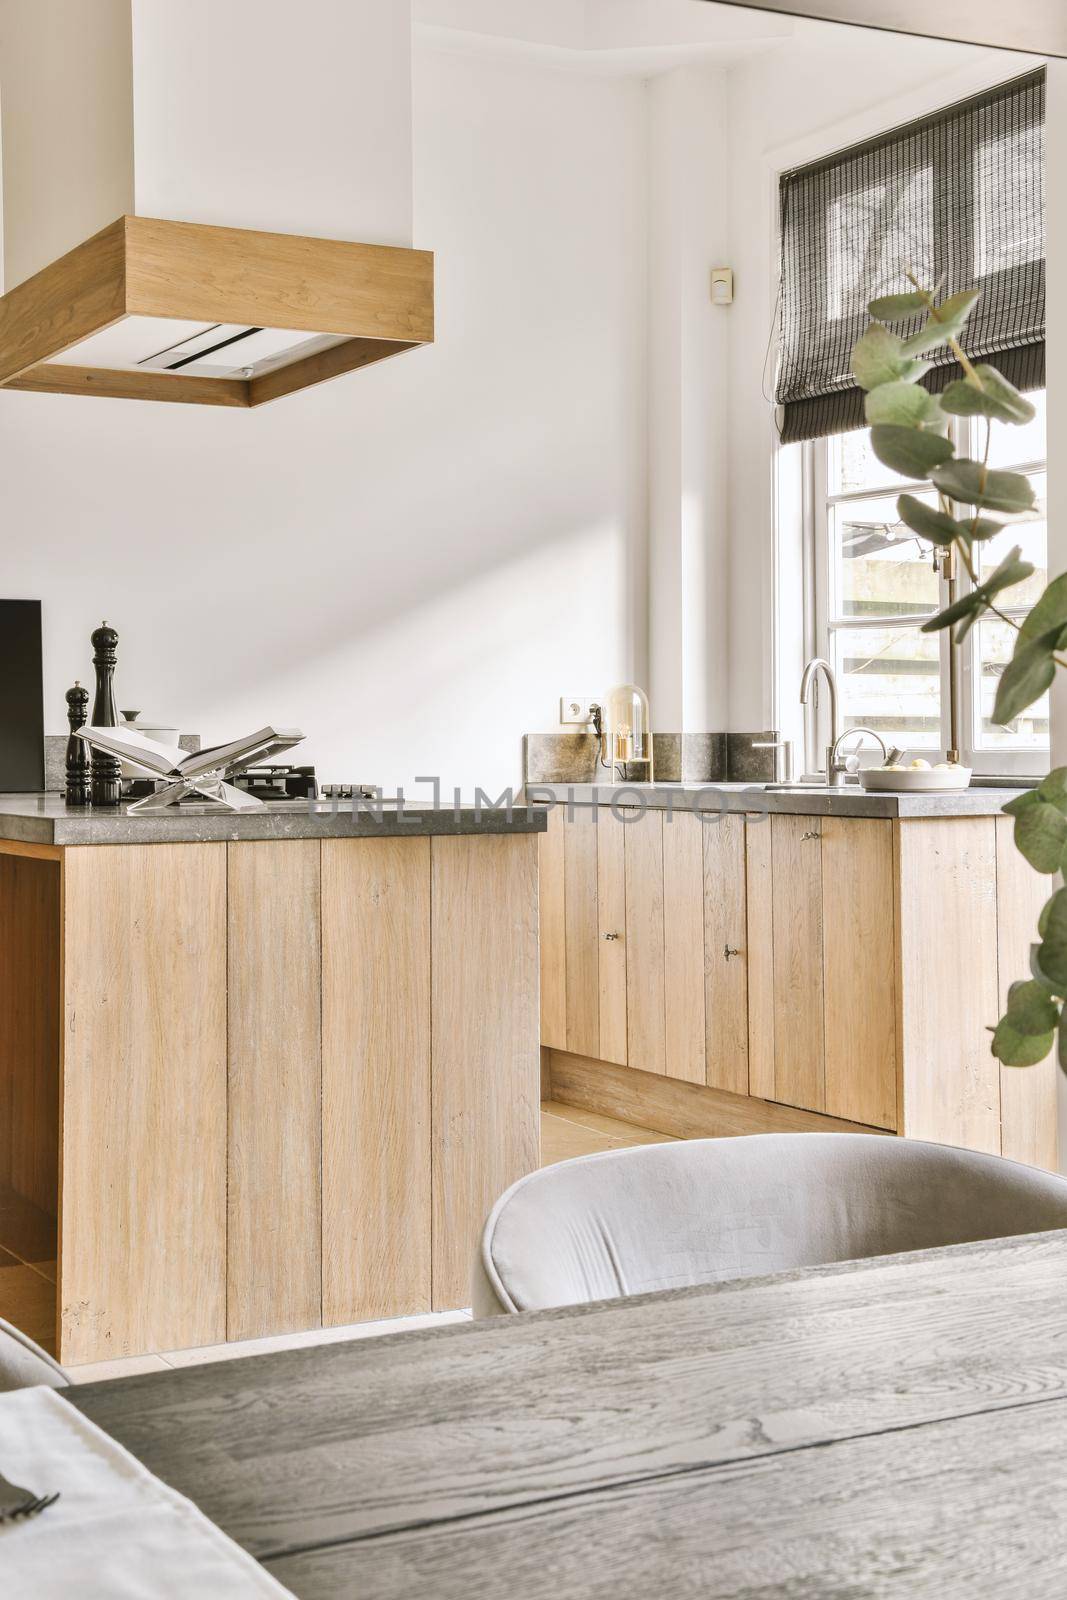 The interior of a spacious, bright kitchen with wooden furniture in a modern house